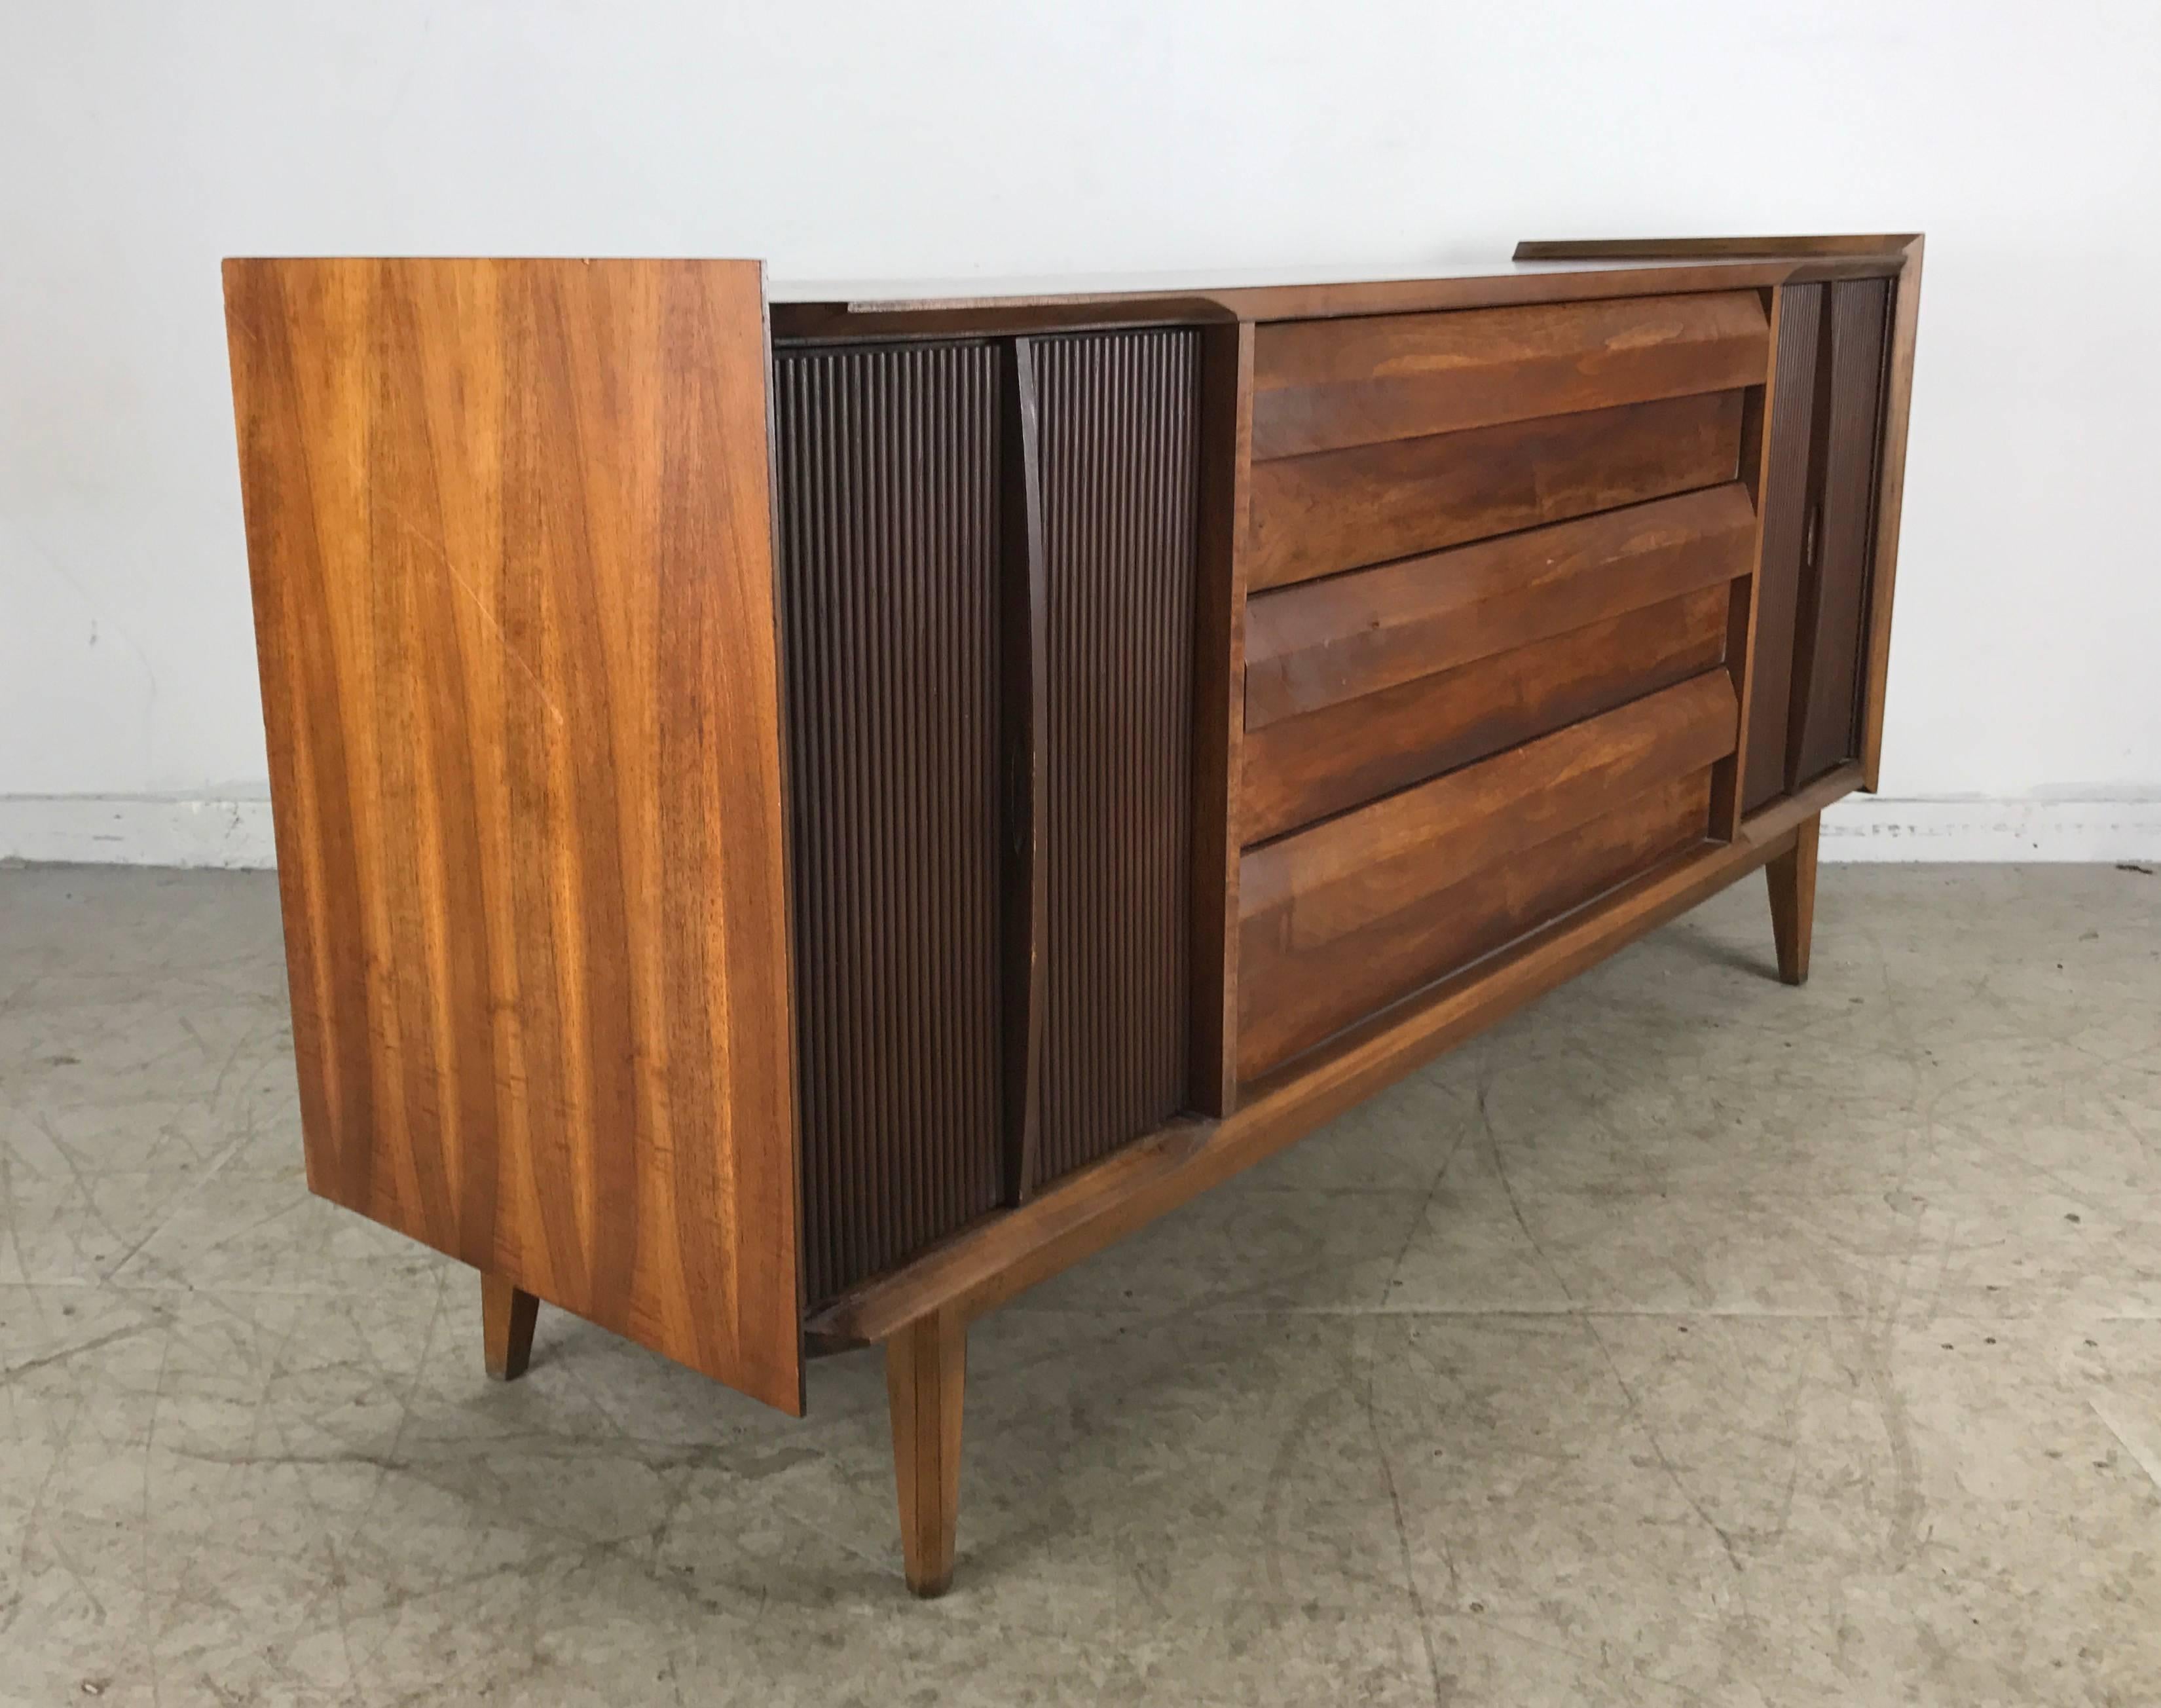 American Modernist Server/Credenza, Two-Tone Walnut Finish, Made by Lane Furniture Co.